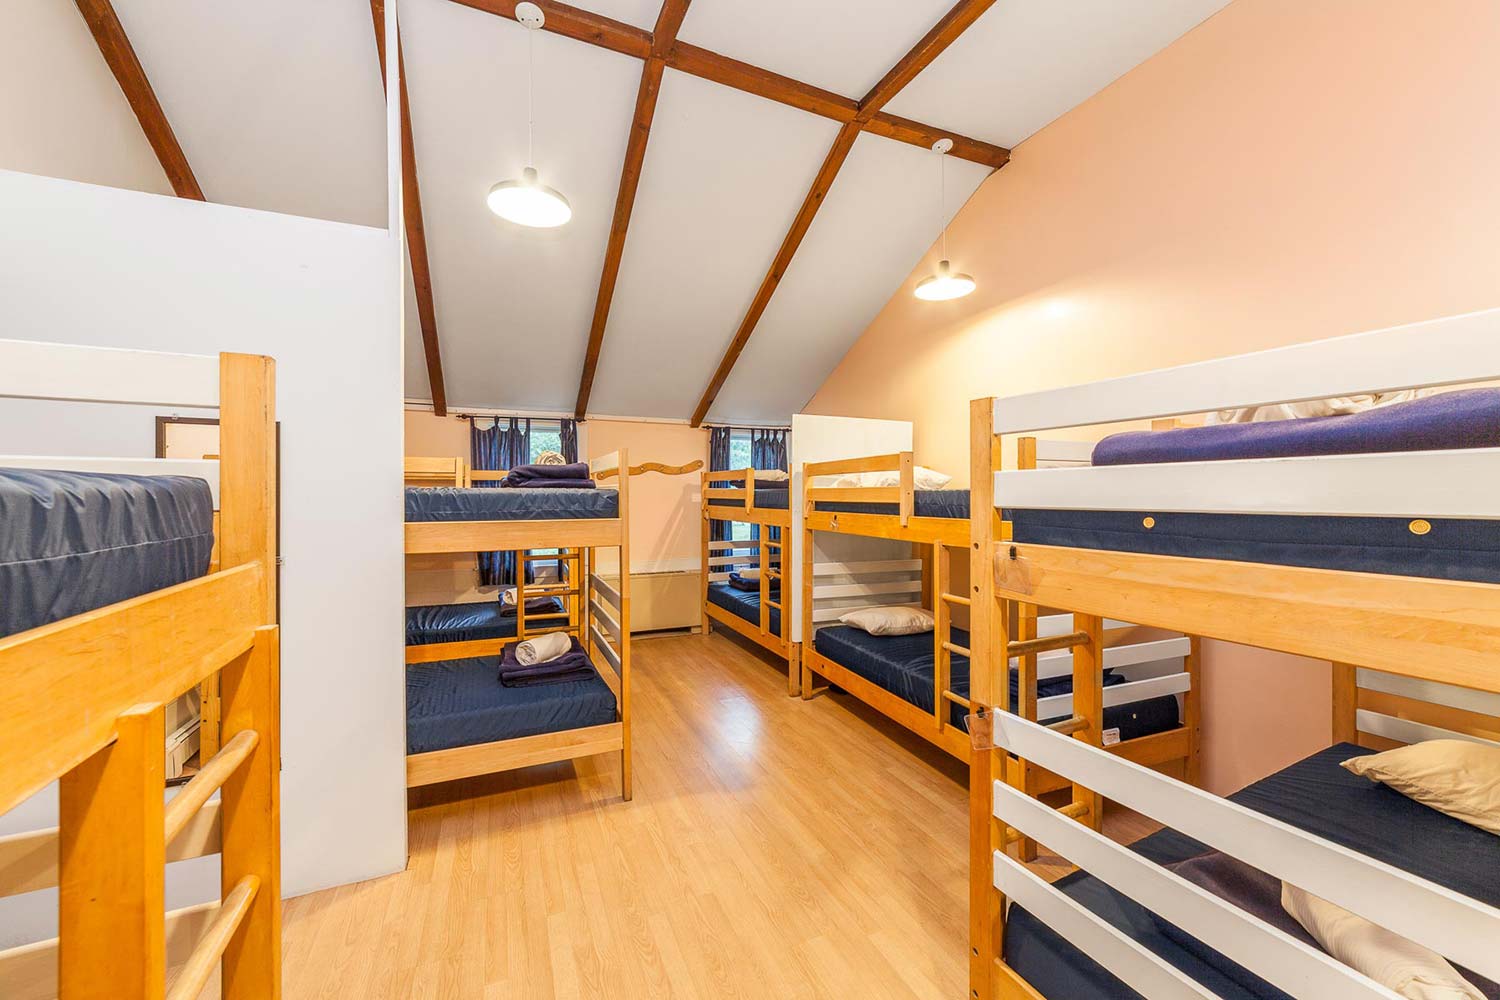 A large well lit dorm room at HI Martha's Vineyard hostel with five sets of twin-sized bunk beds, hardwood floors and high ceilings